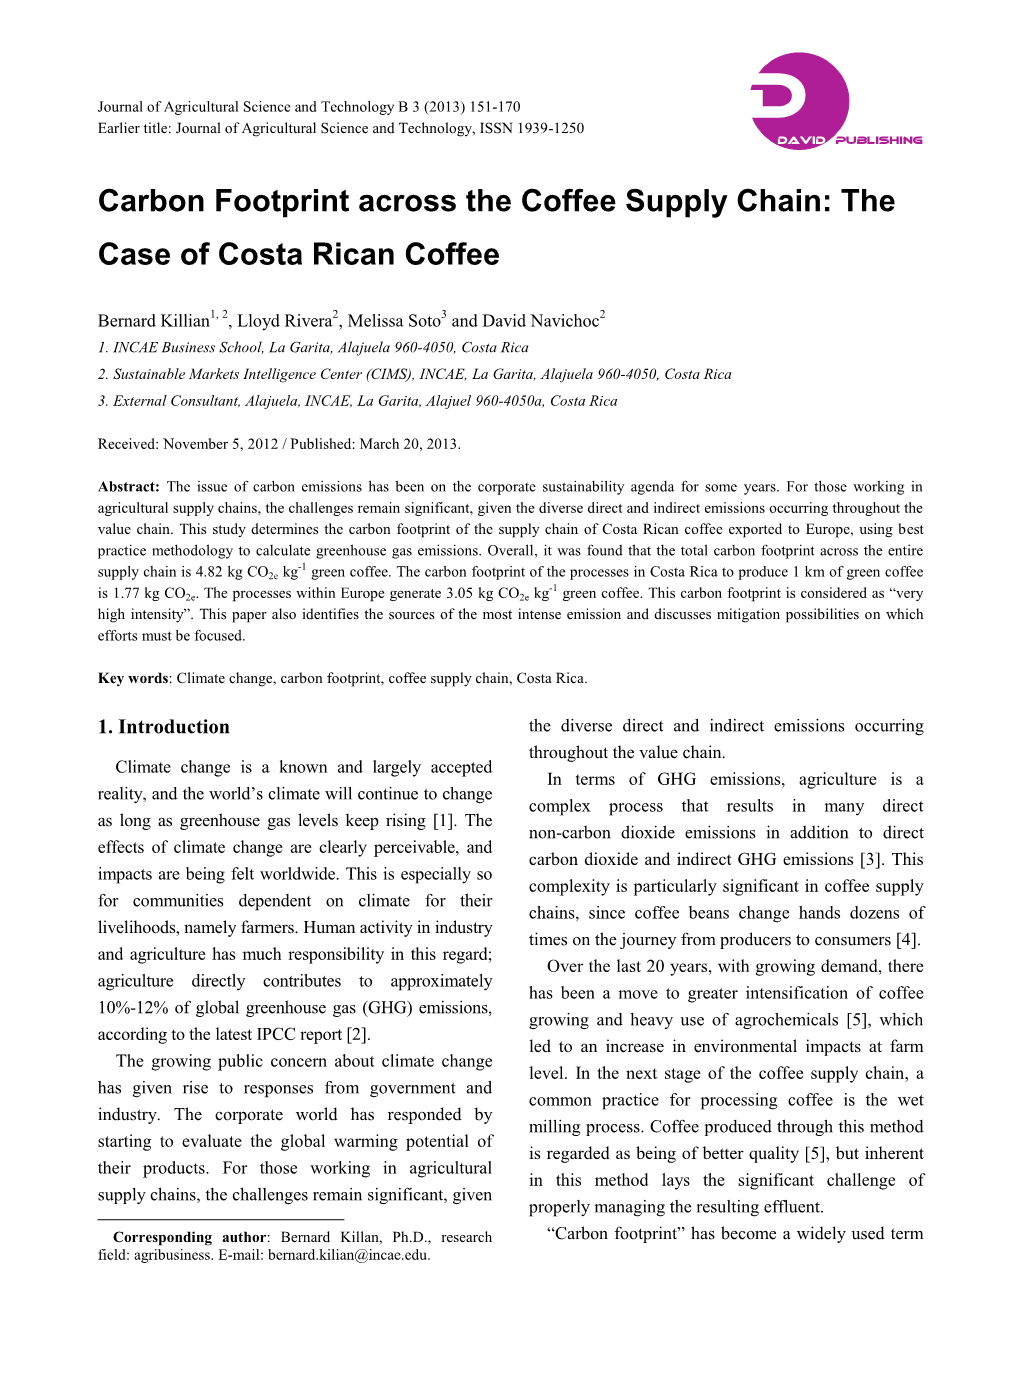 Carbon Footprint Across the Coffee Supply Chain: the Case of Costa Rican Coffee